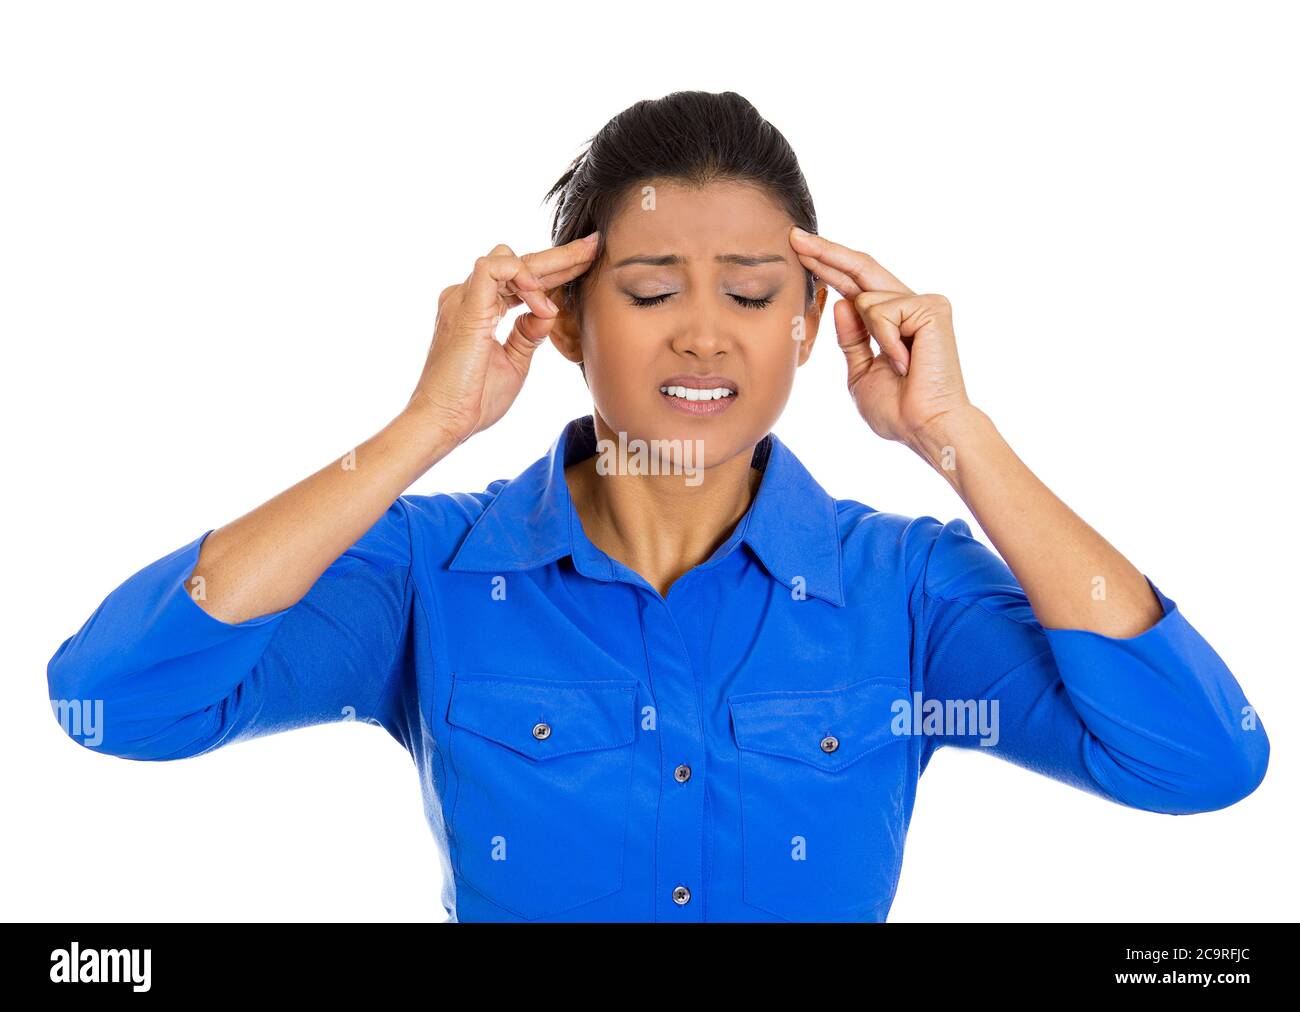 Portrait of an worried young woman having really bad headache placing both hands on temples, isolated on white background. Stock Photo